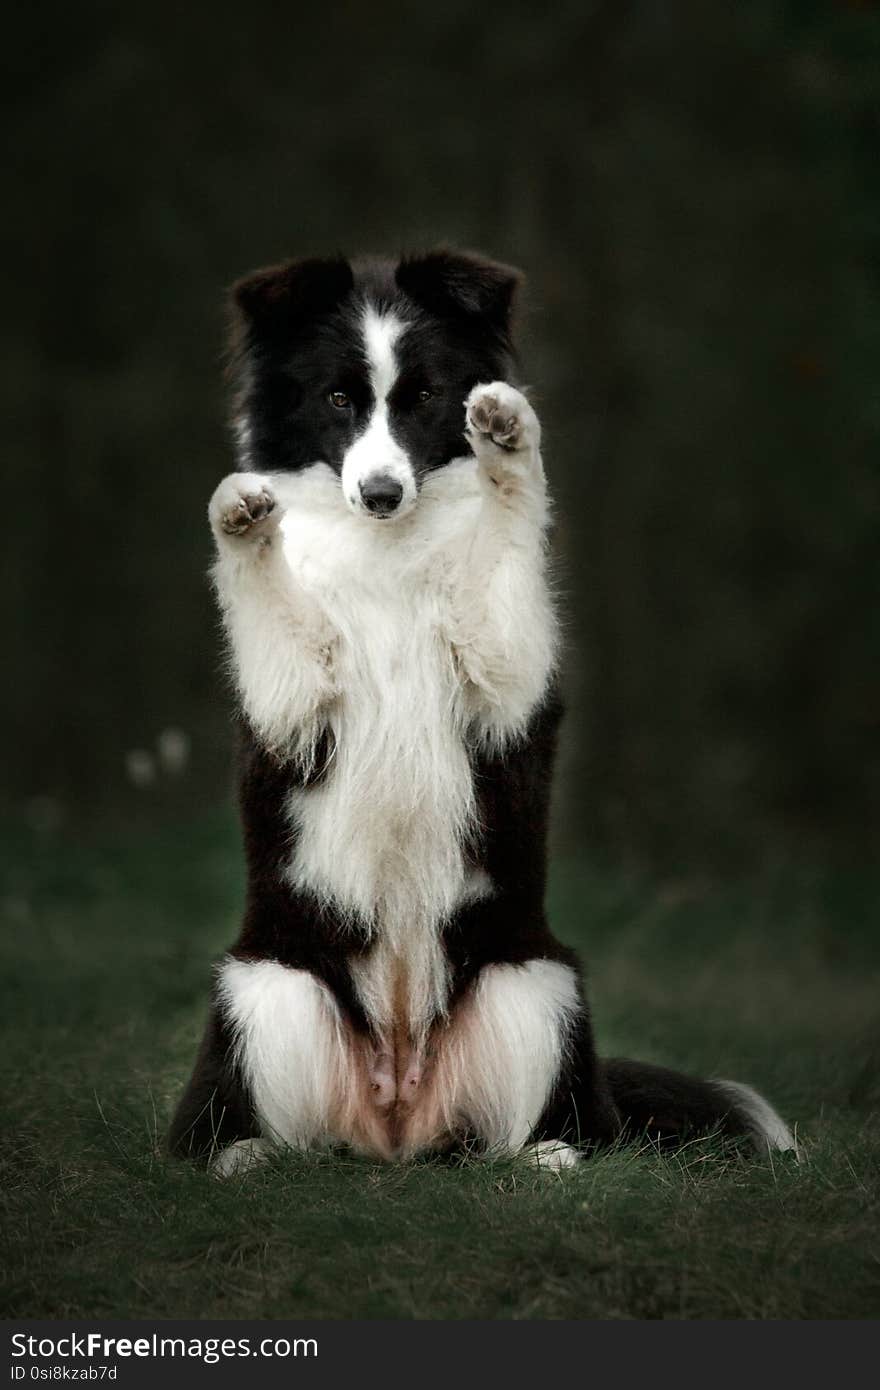 Black and white Border Collies like as bunny in the dark forest